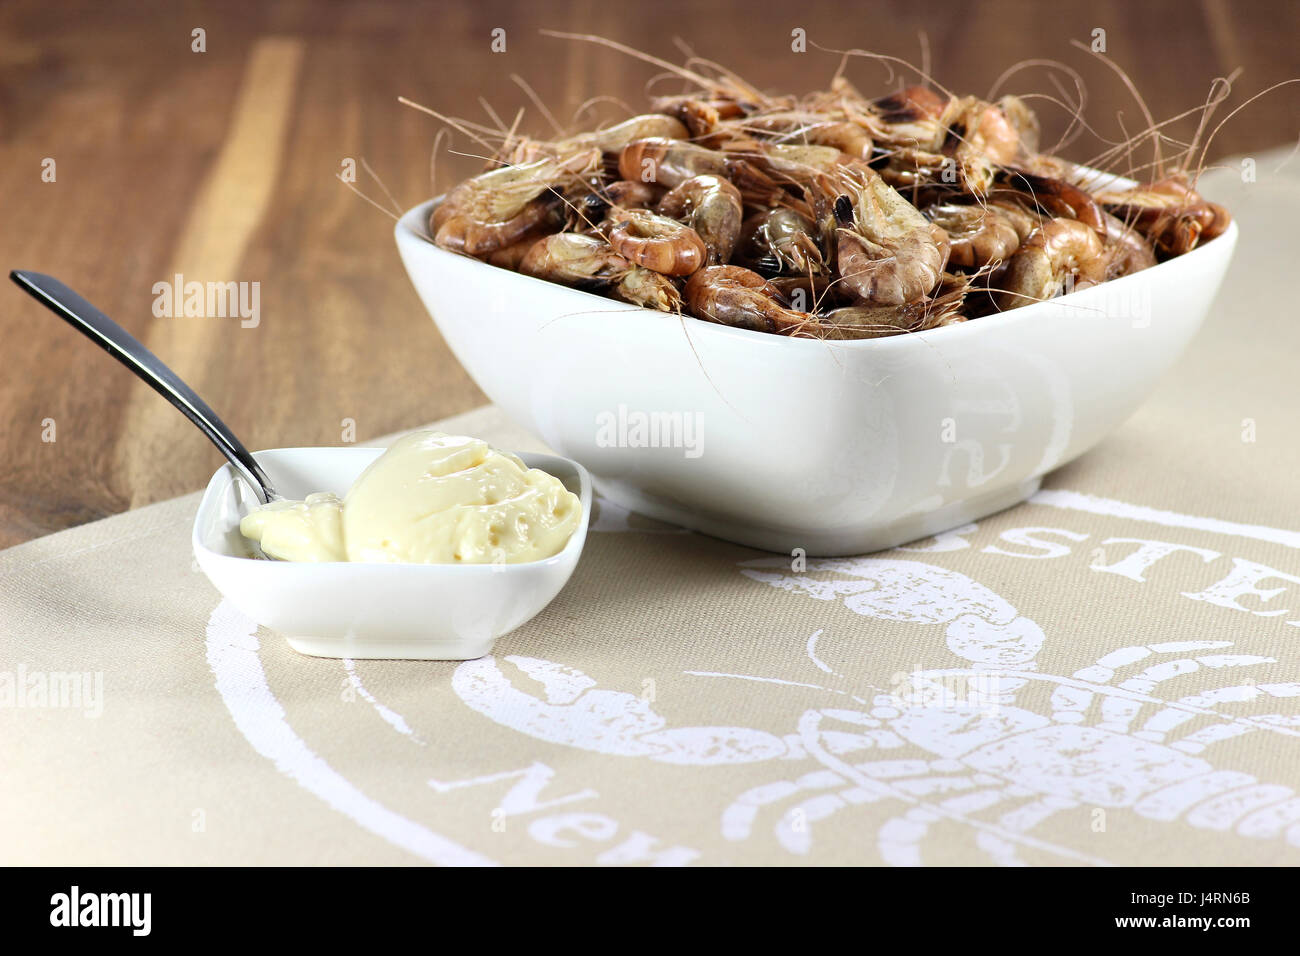 unpeeled brown shrimps in a ceramic bowl Stock Photo